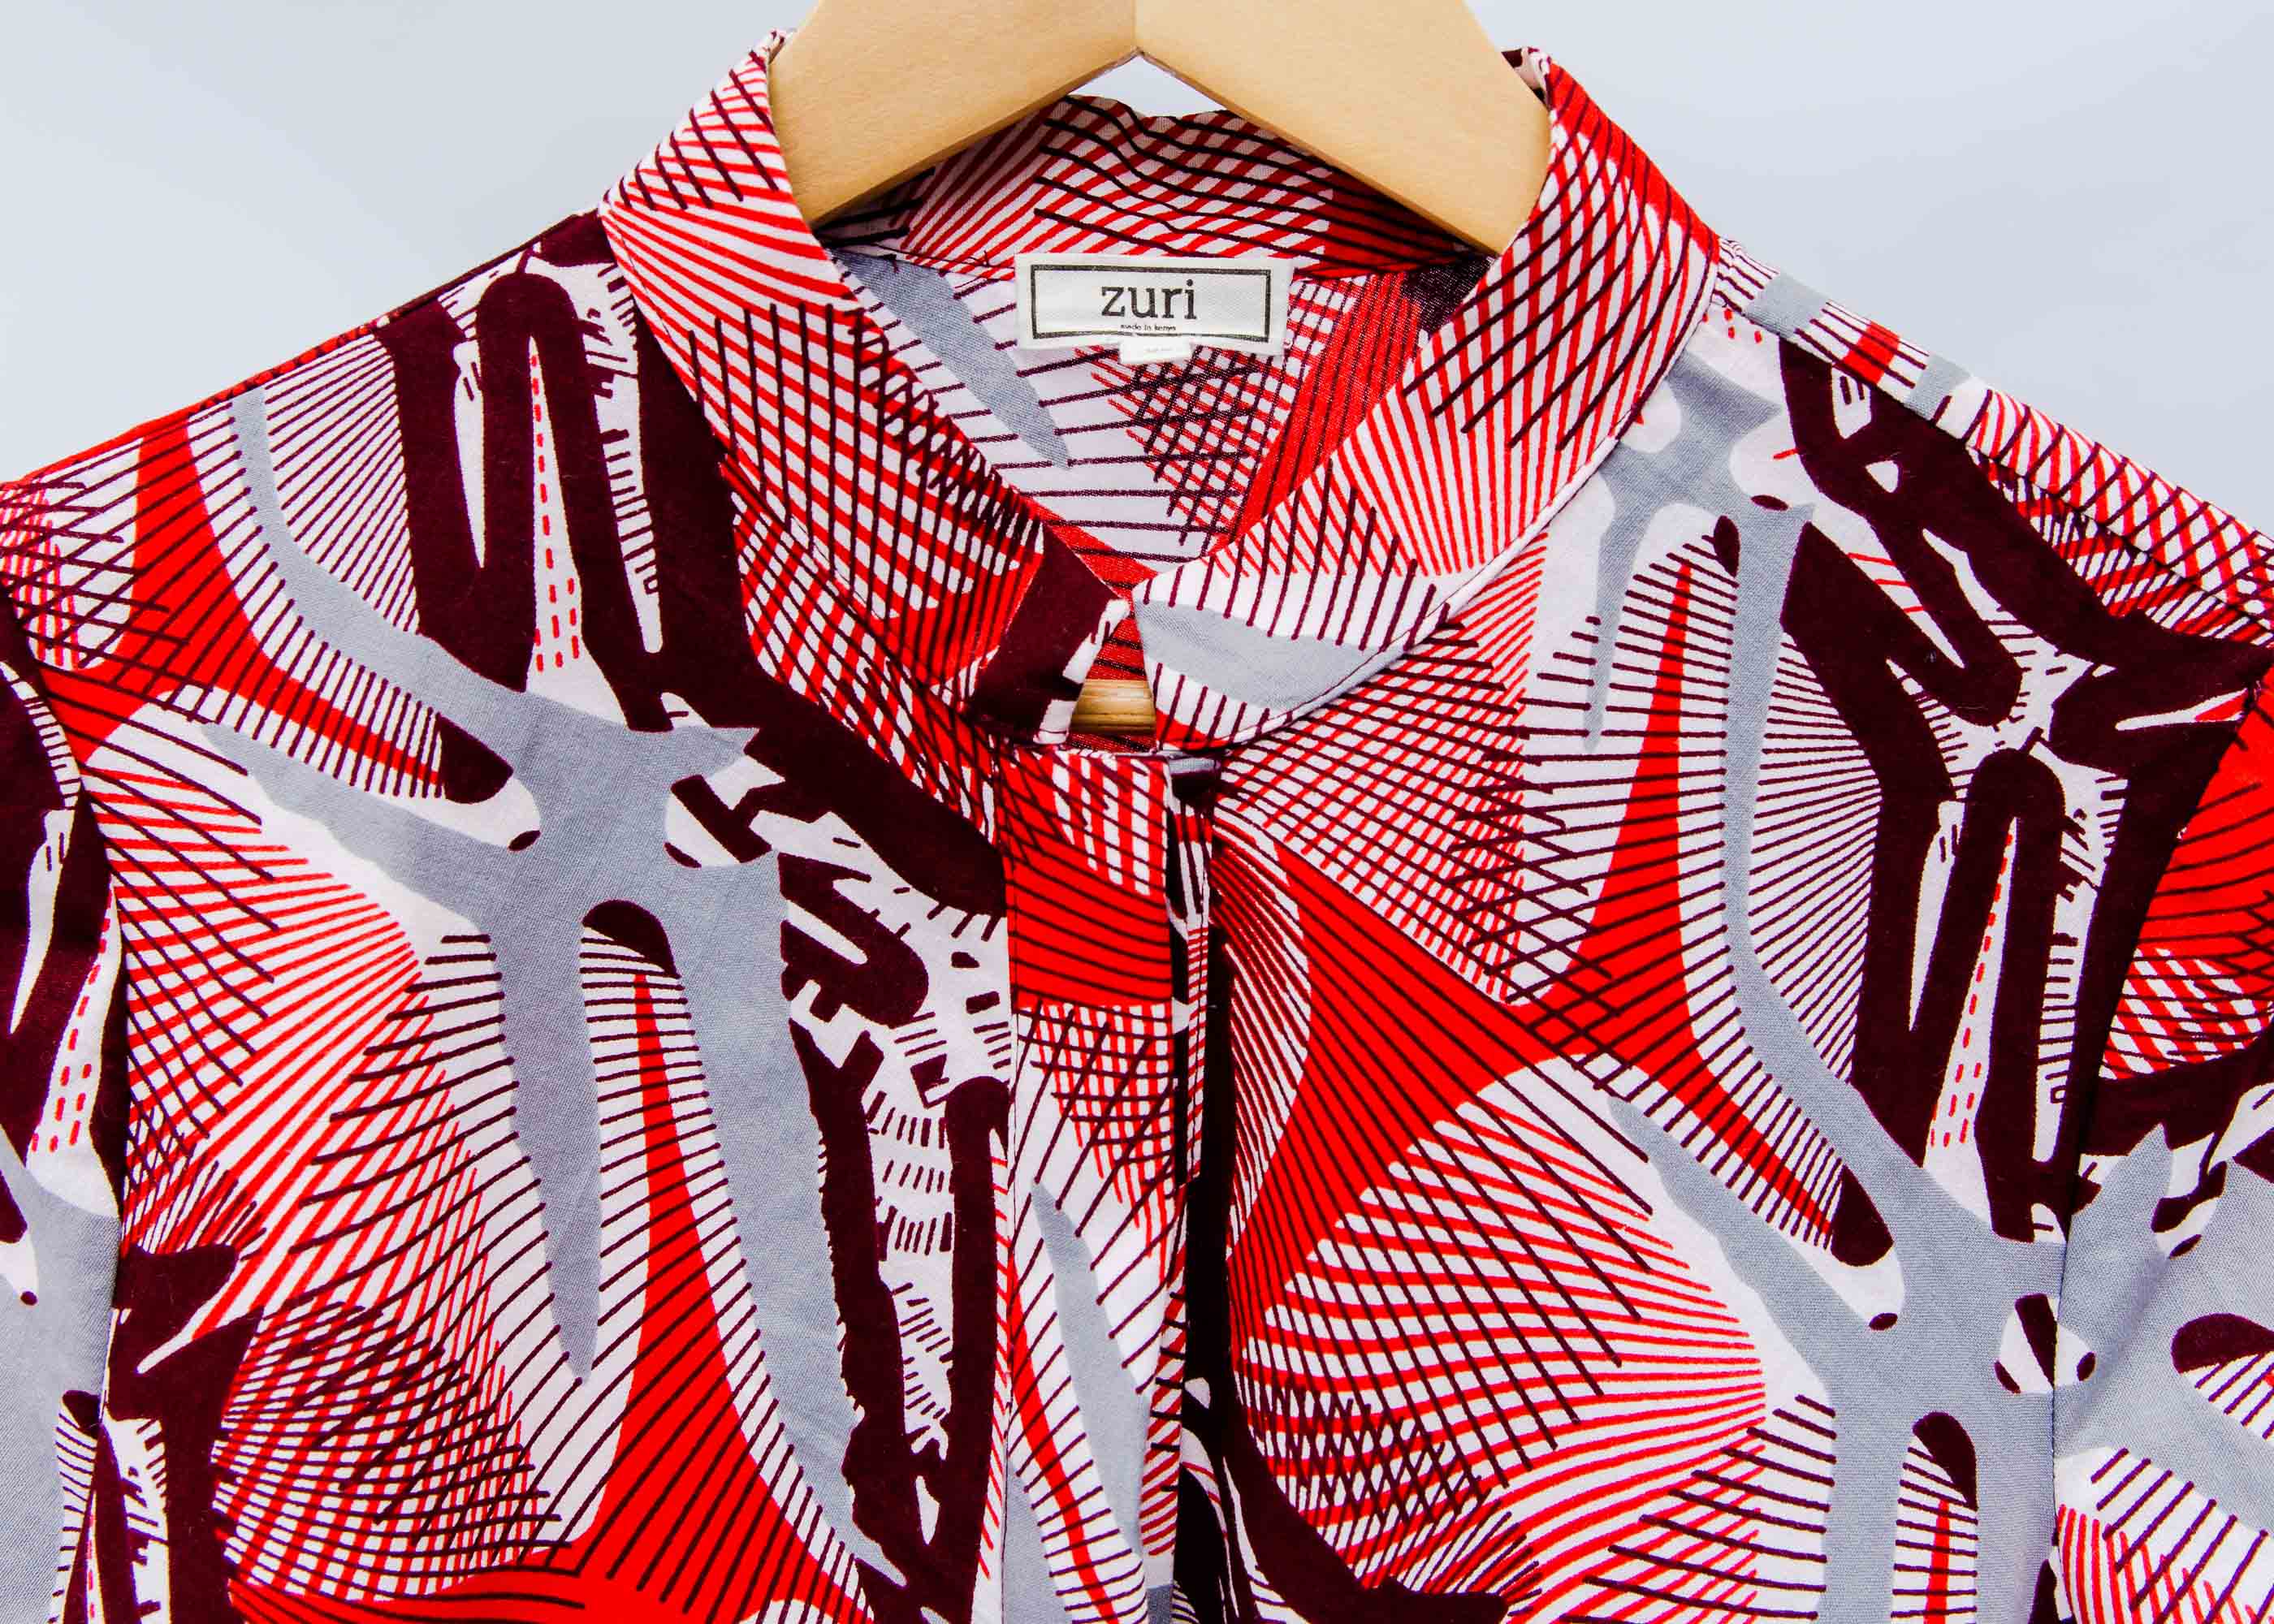 Display of a red, grey and maroon geometric shirt dress